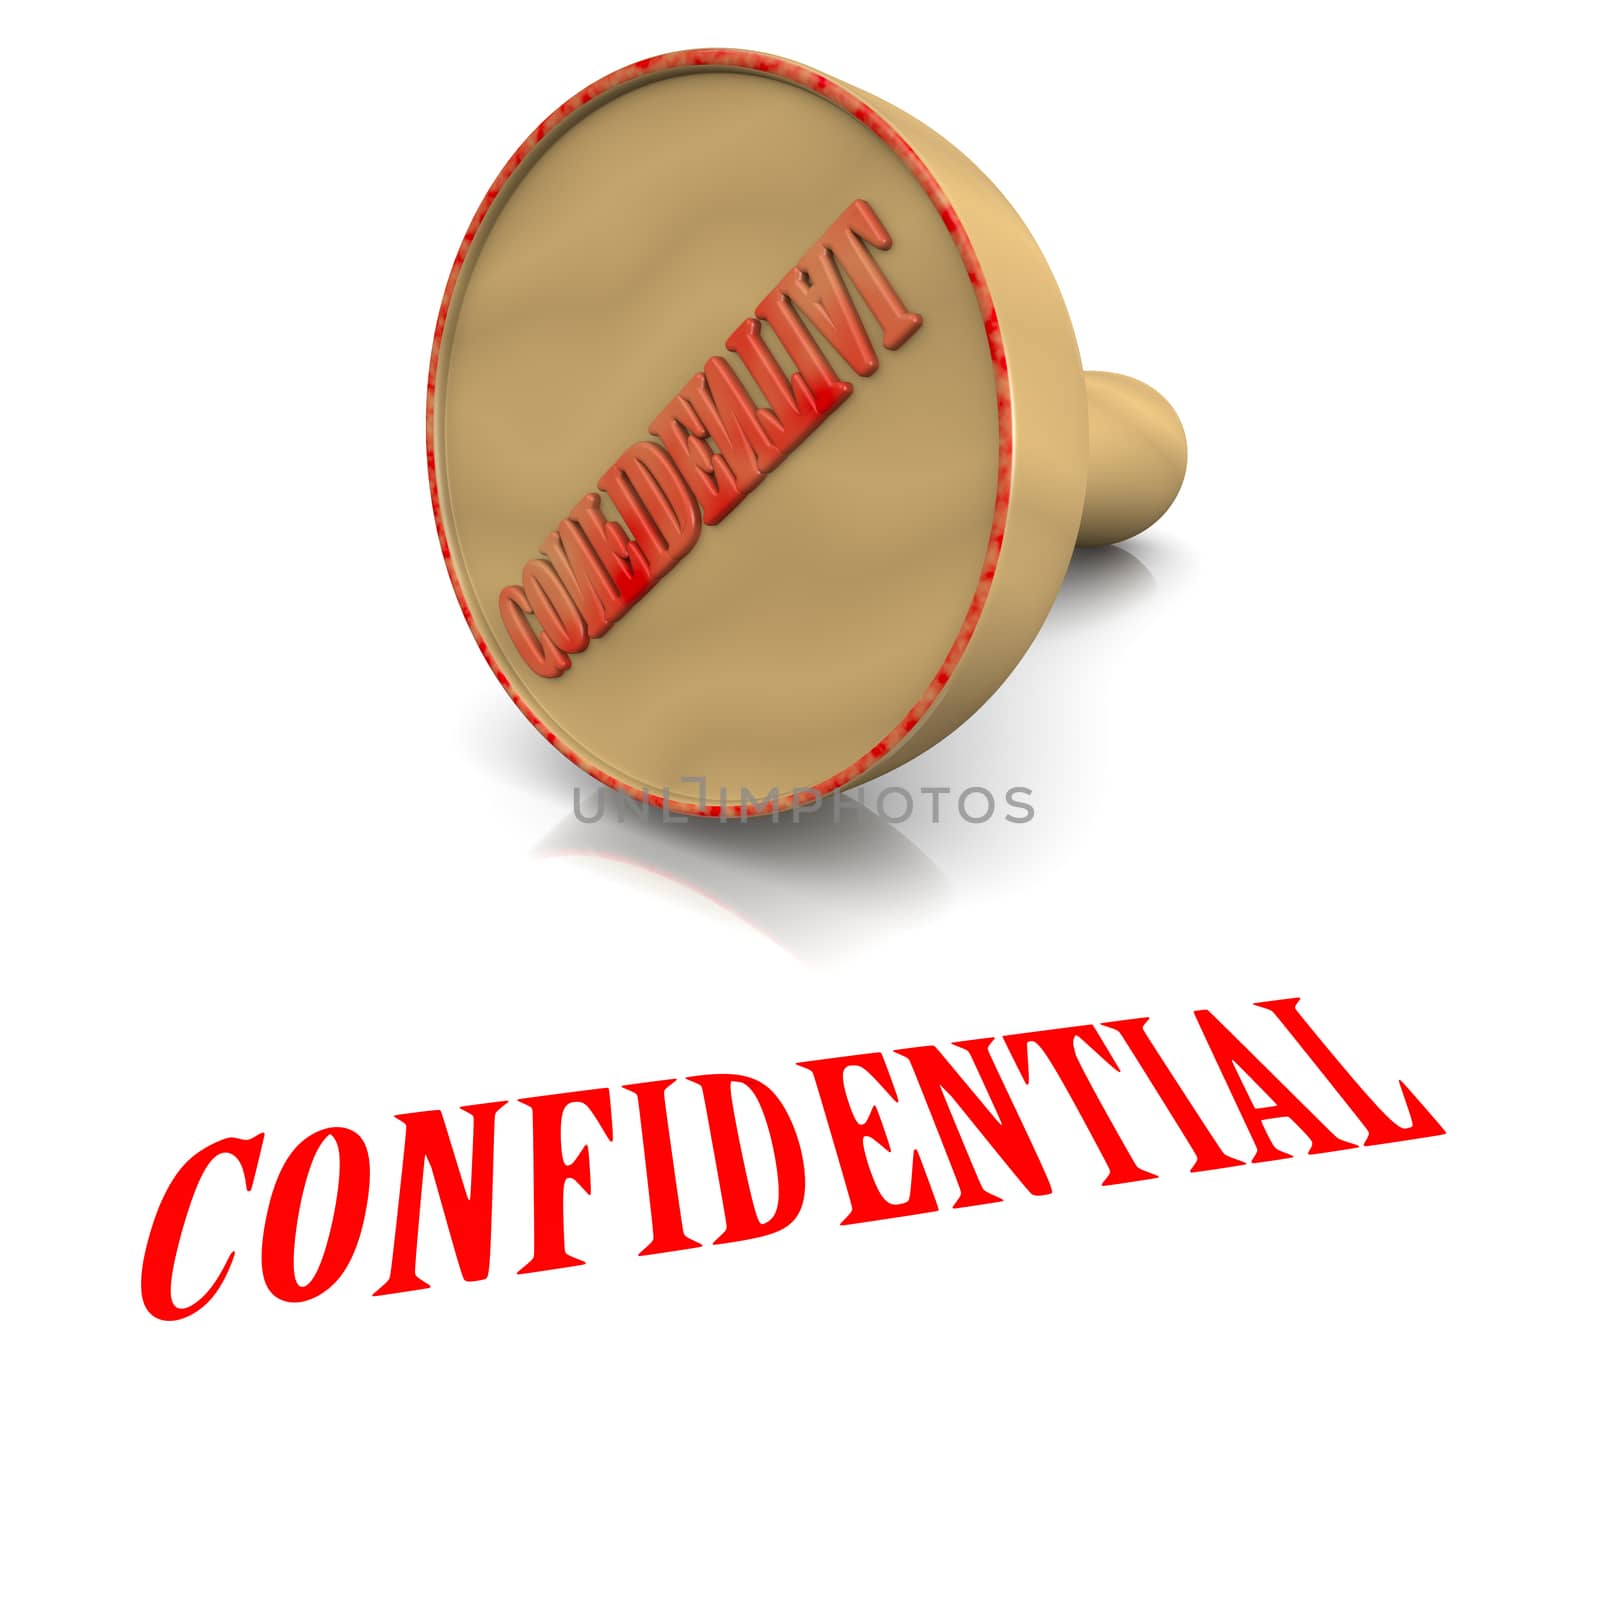 Confidential Red Ink Text Wooden Stamp on White Background 3D Illustration